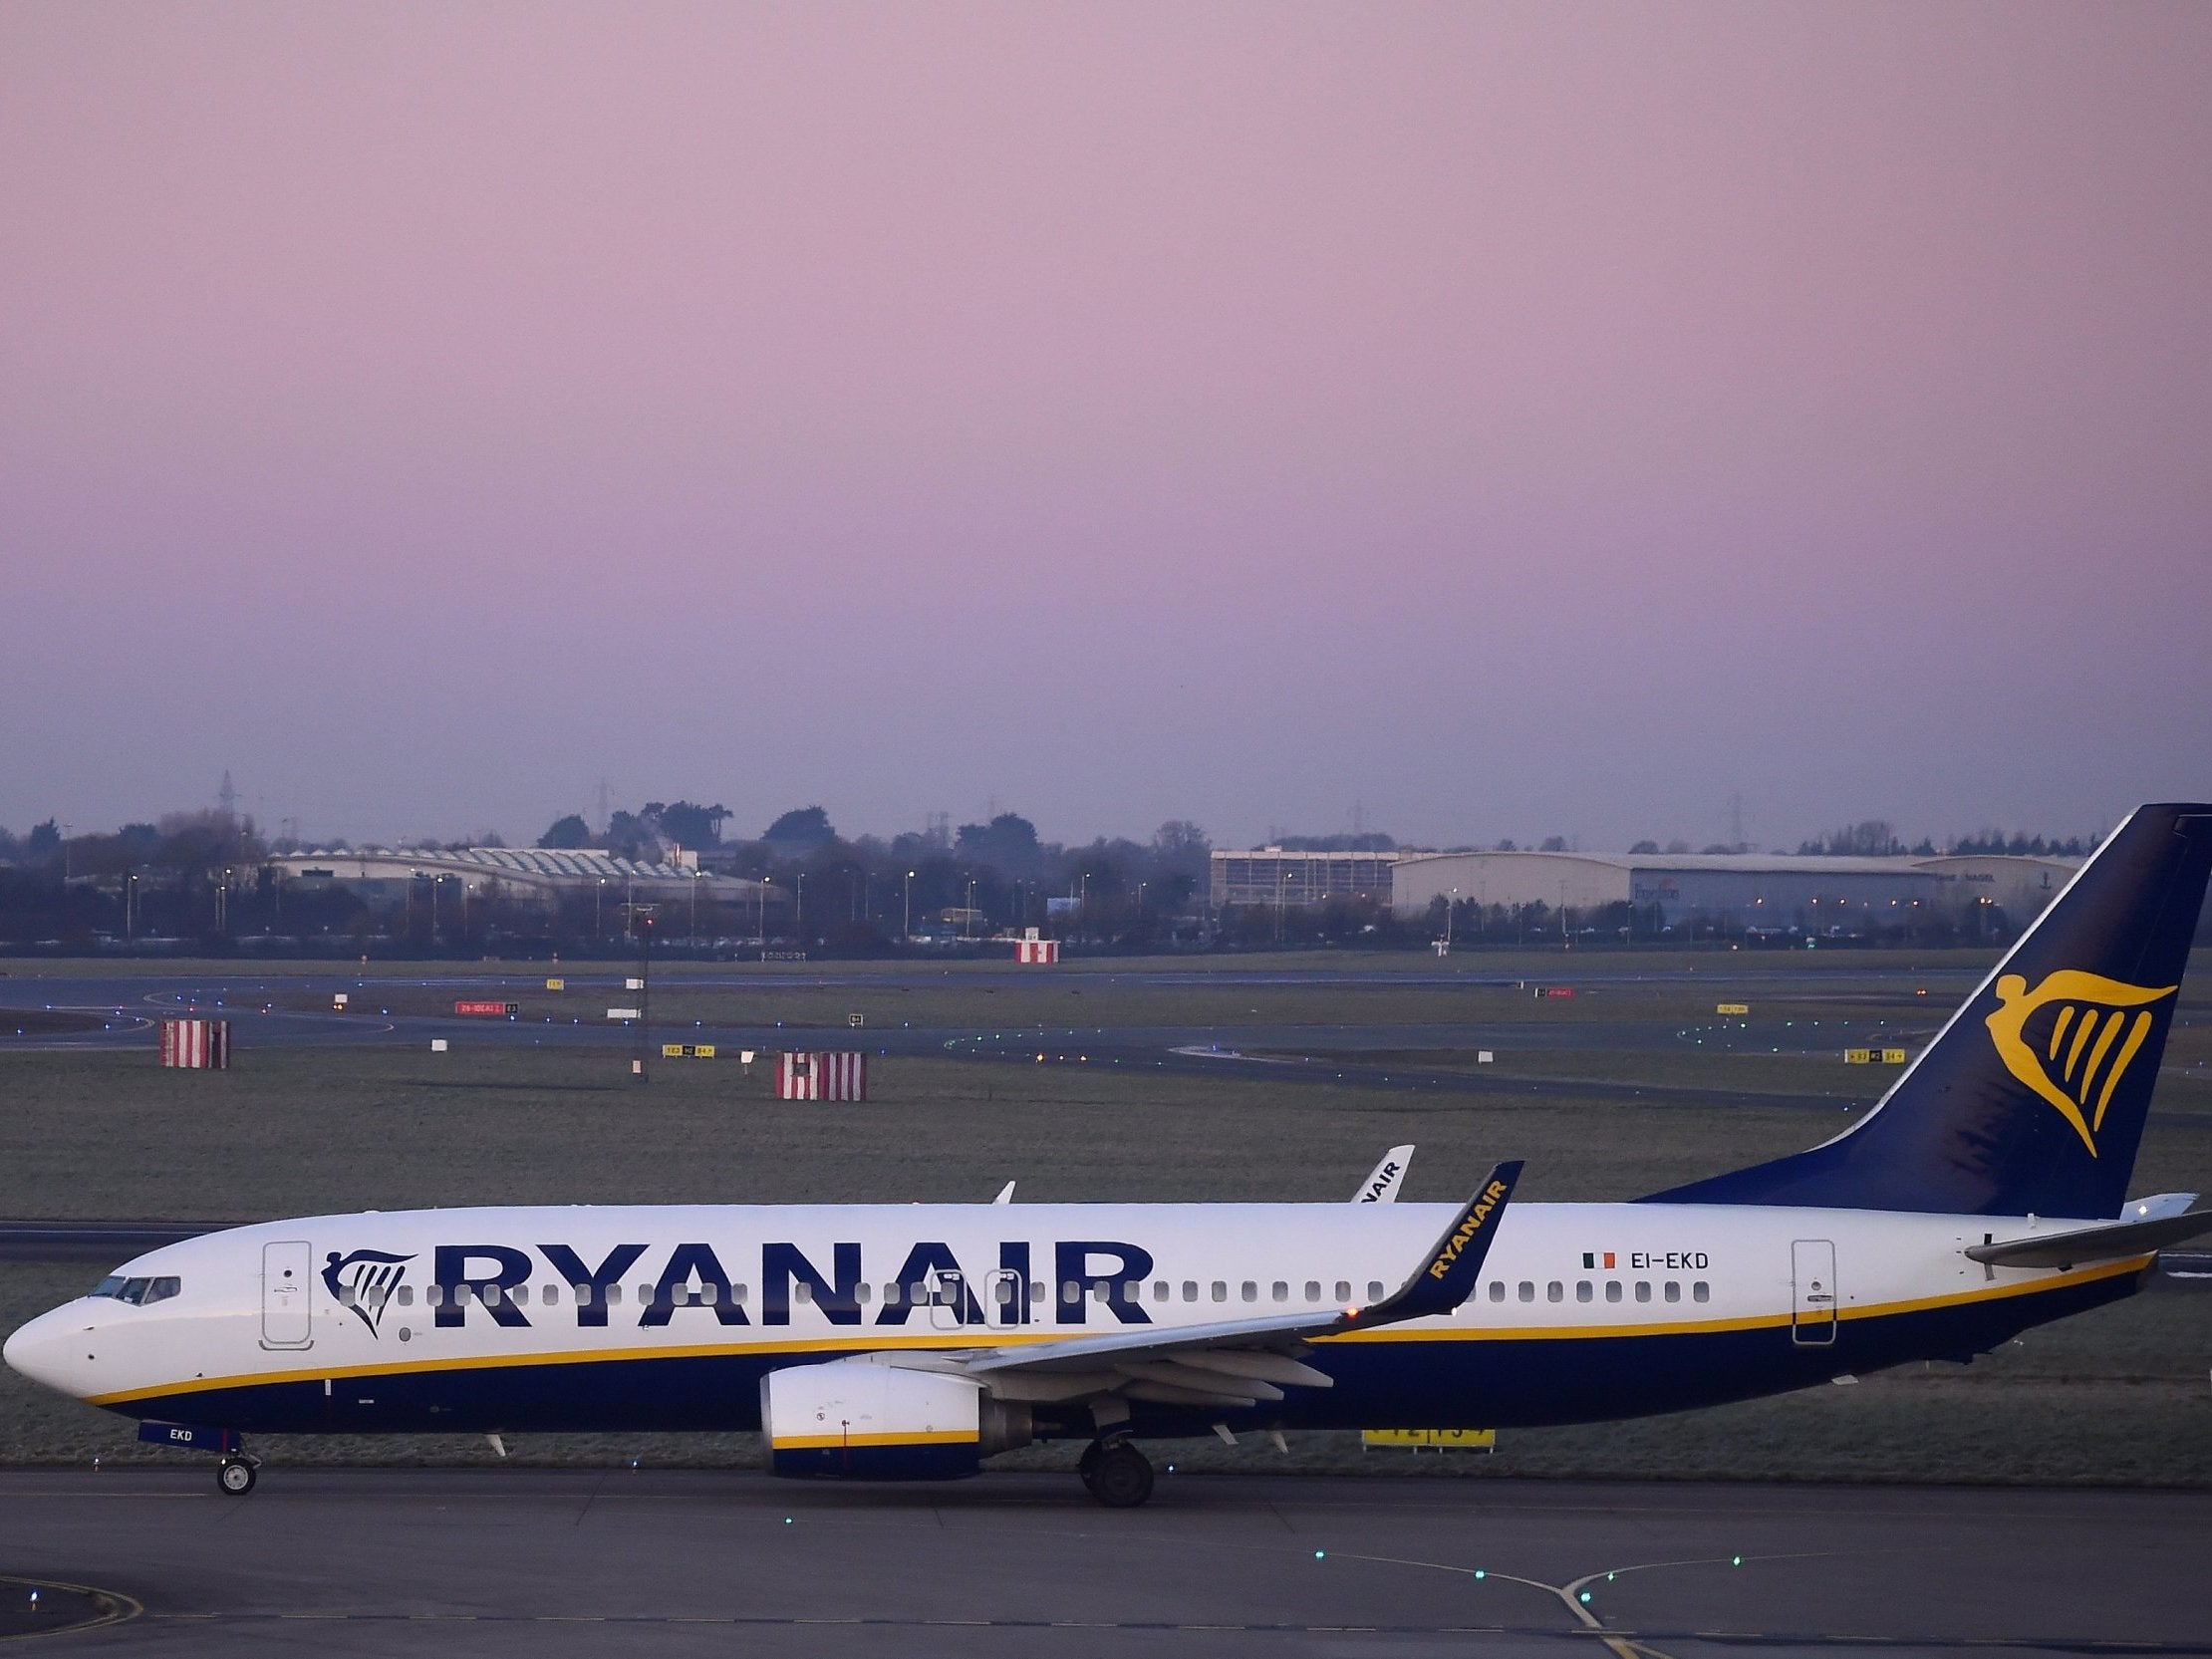 A man chased after a Ryanair plane after missing his flight at Dublin Airport